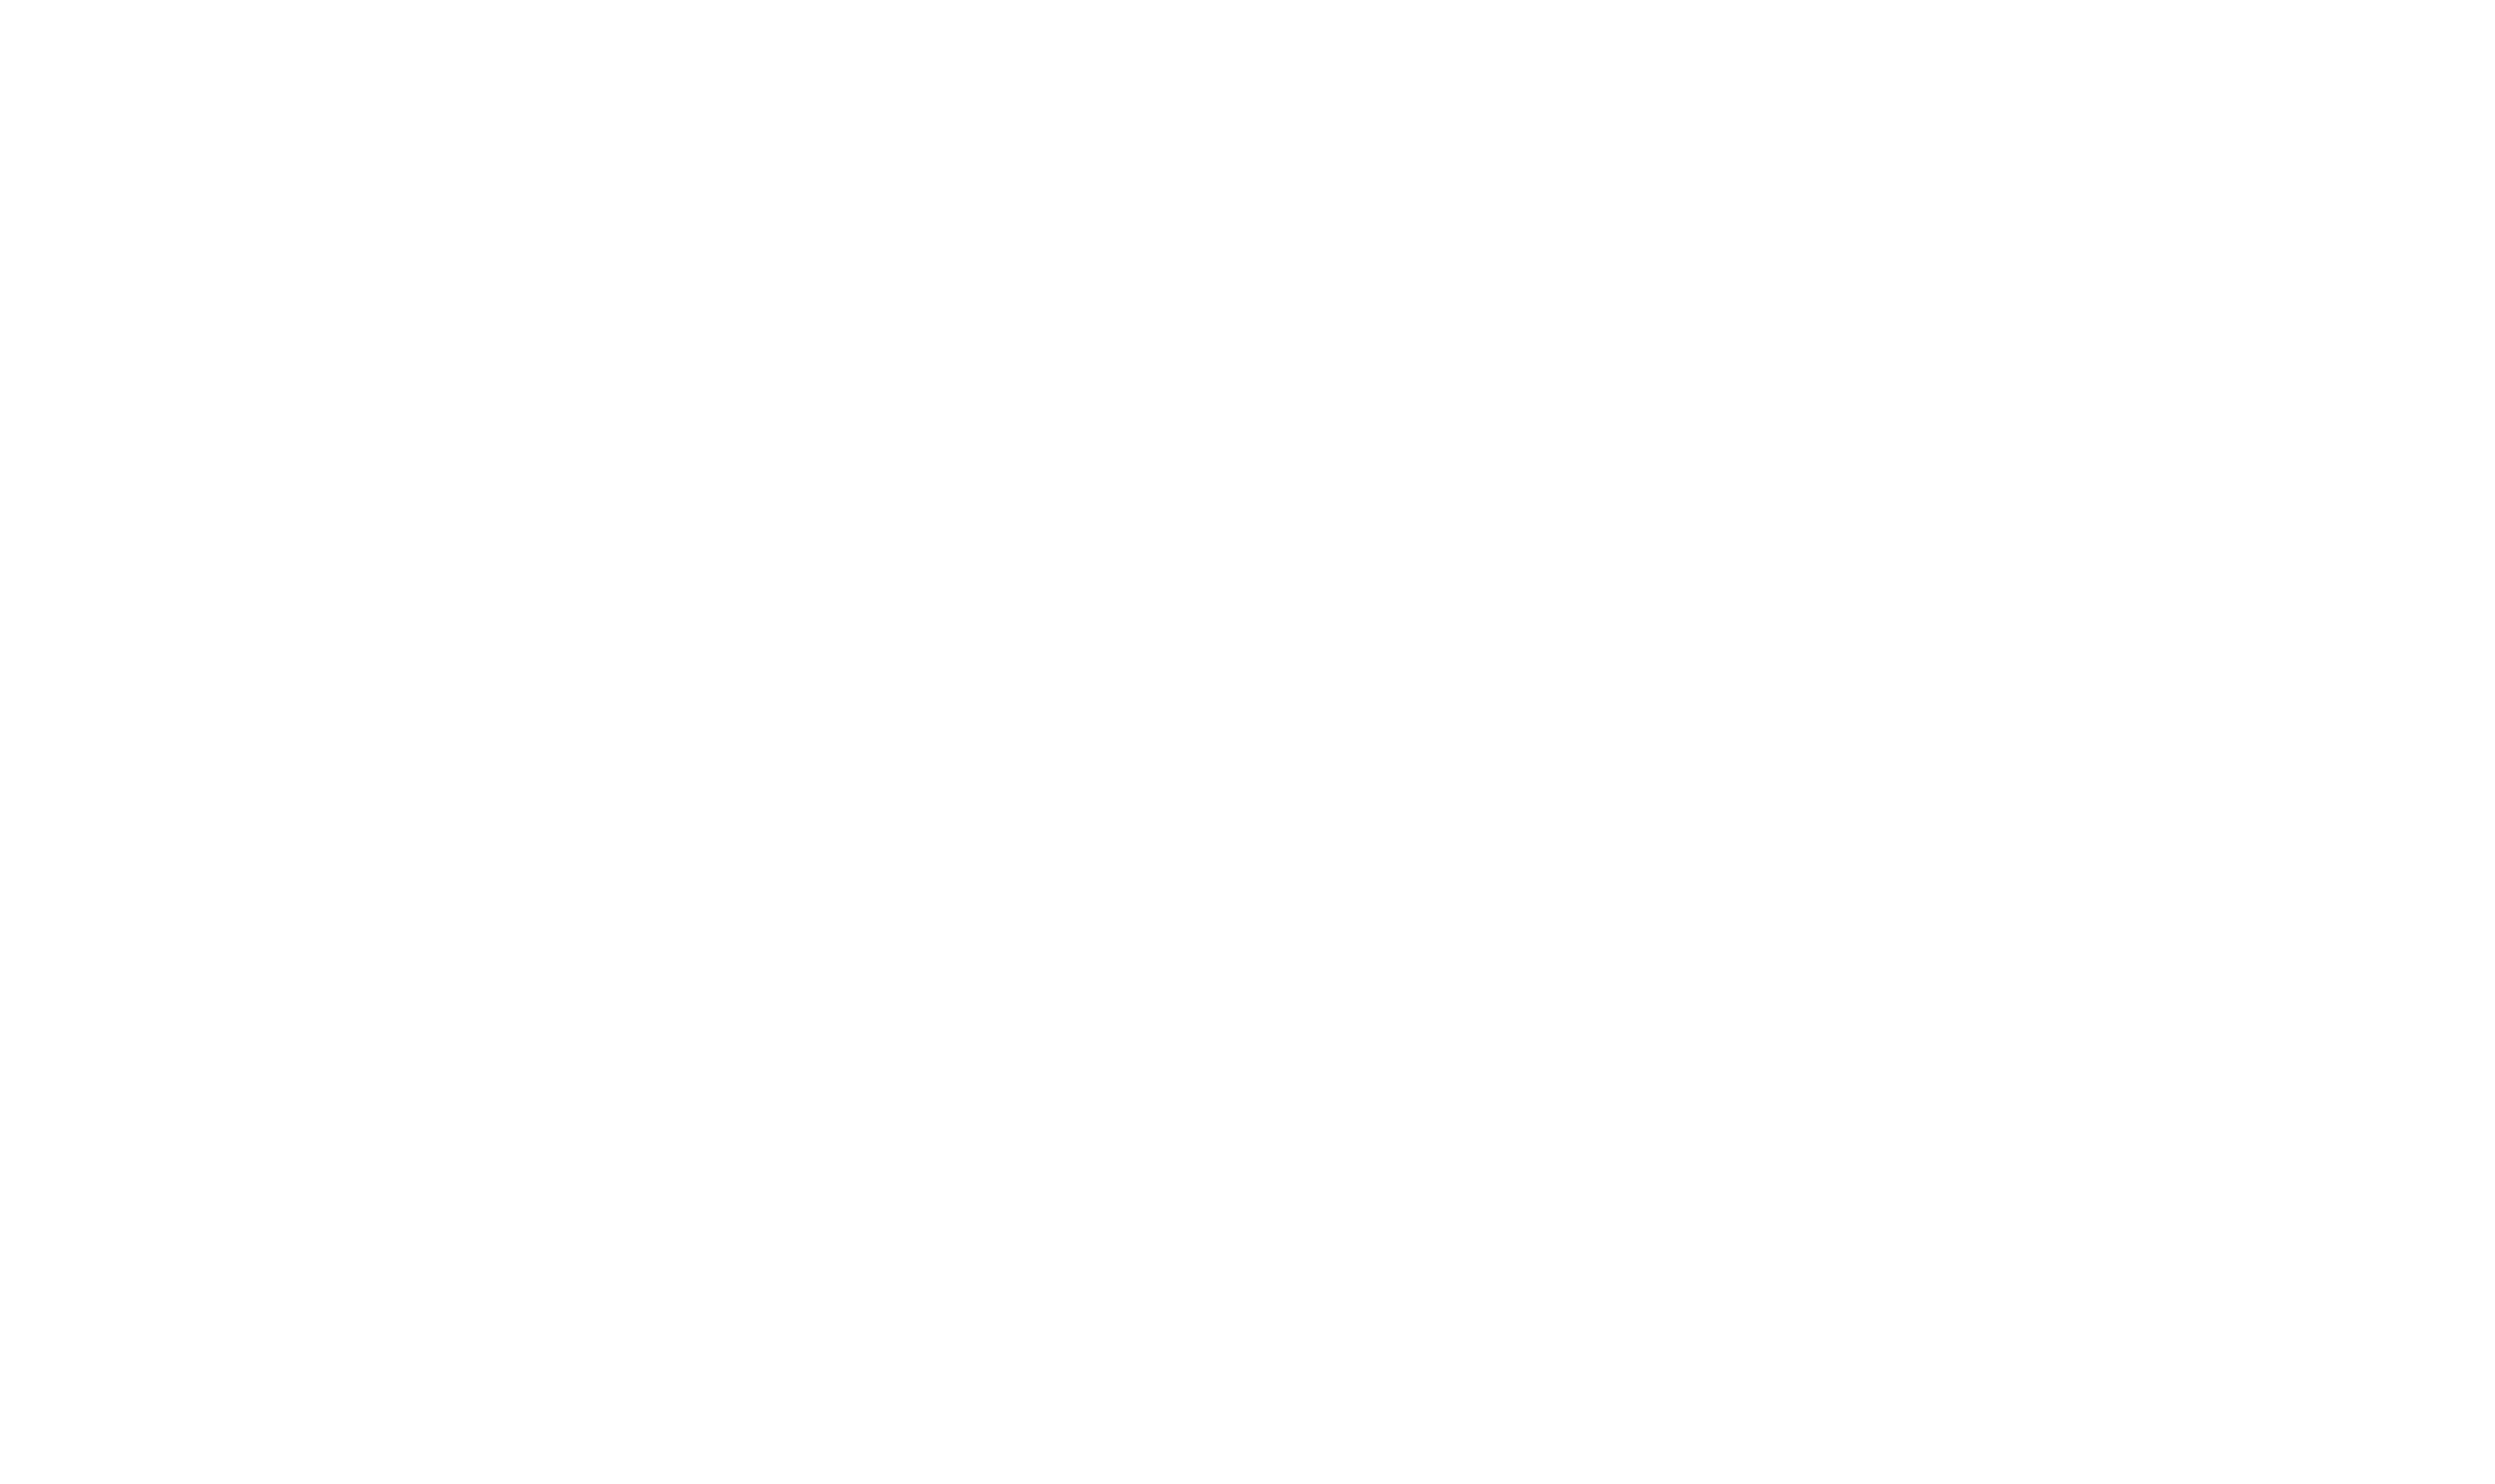 CHINESE_Traditional_white logo RGC BEVERAGES